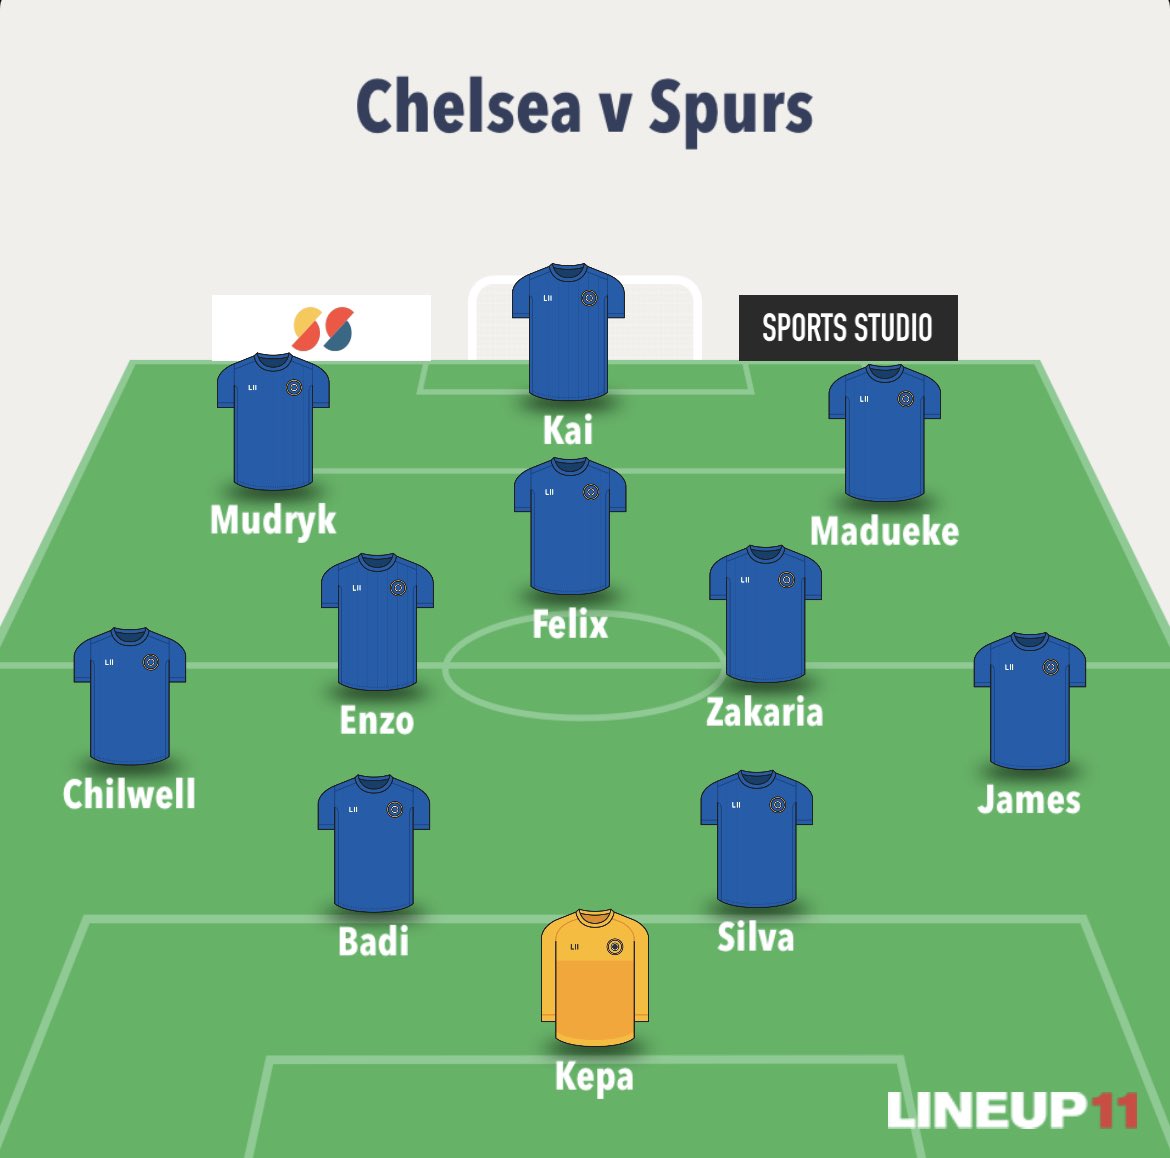 My lineup for Chelsea v Spurs on Sunday. https://t.co/atO6yAW4P2